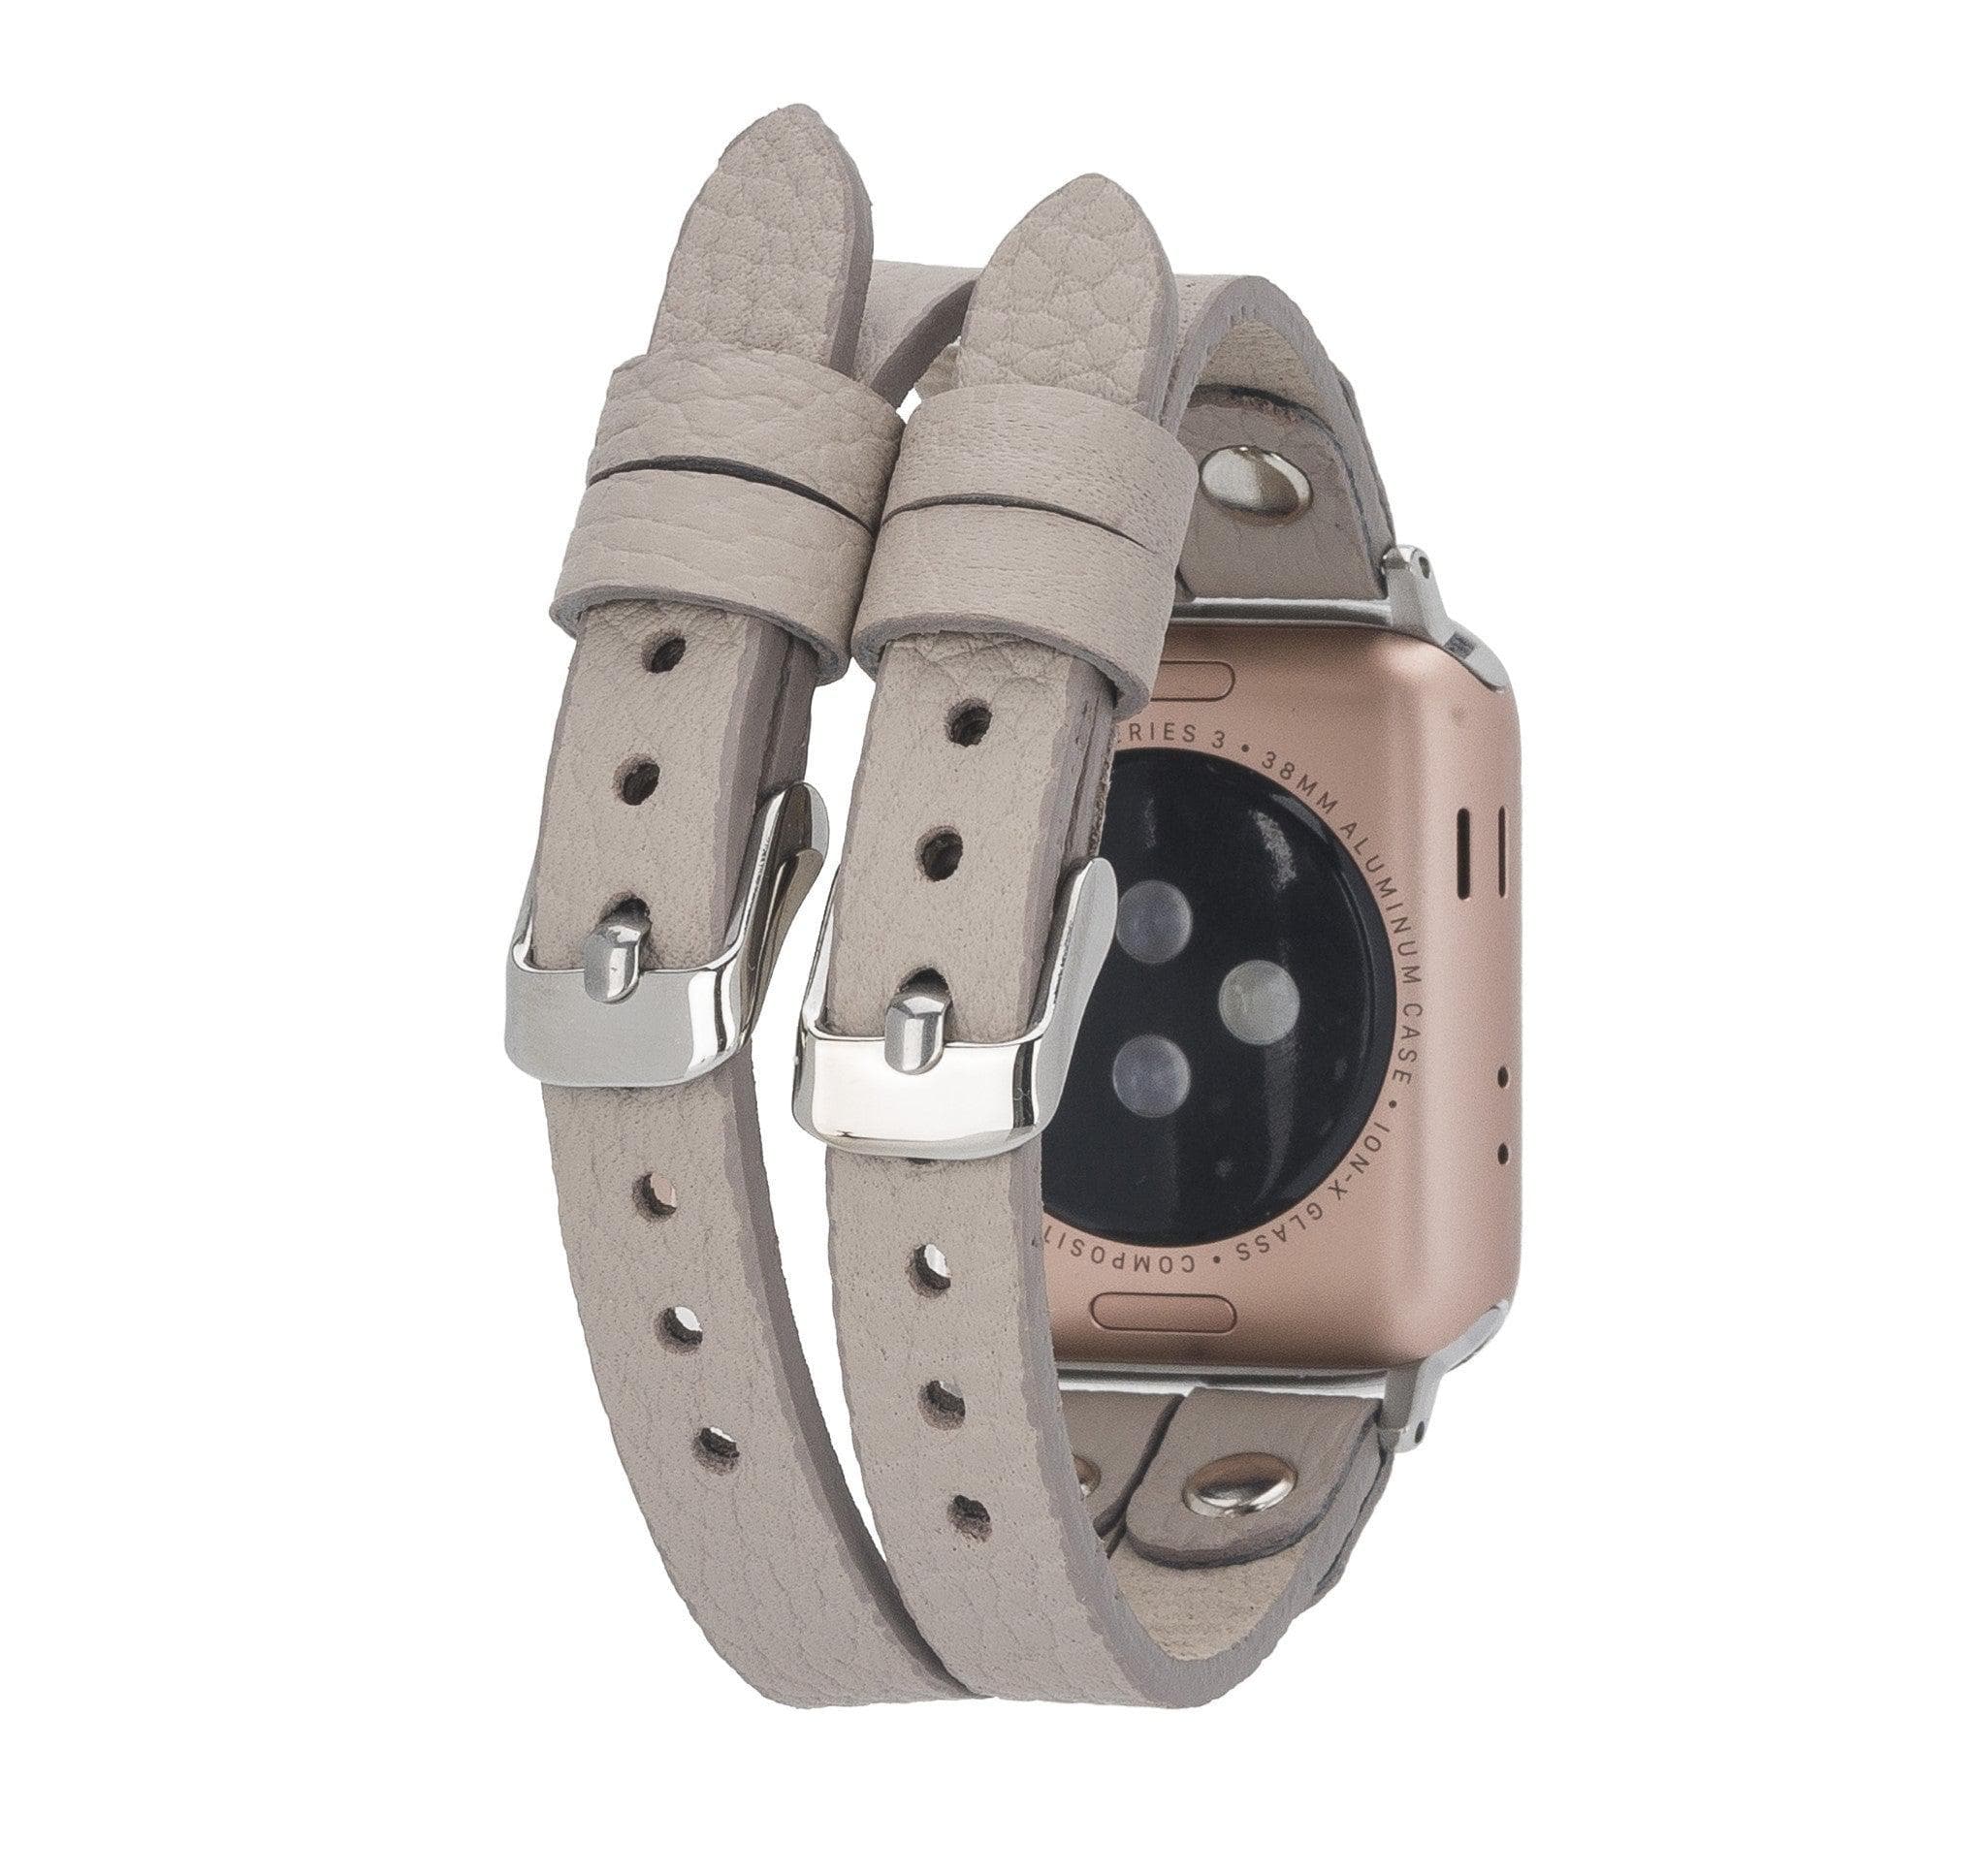 Durham Ely Apple Watch Leather Straps